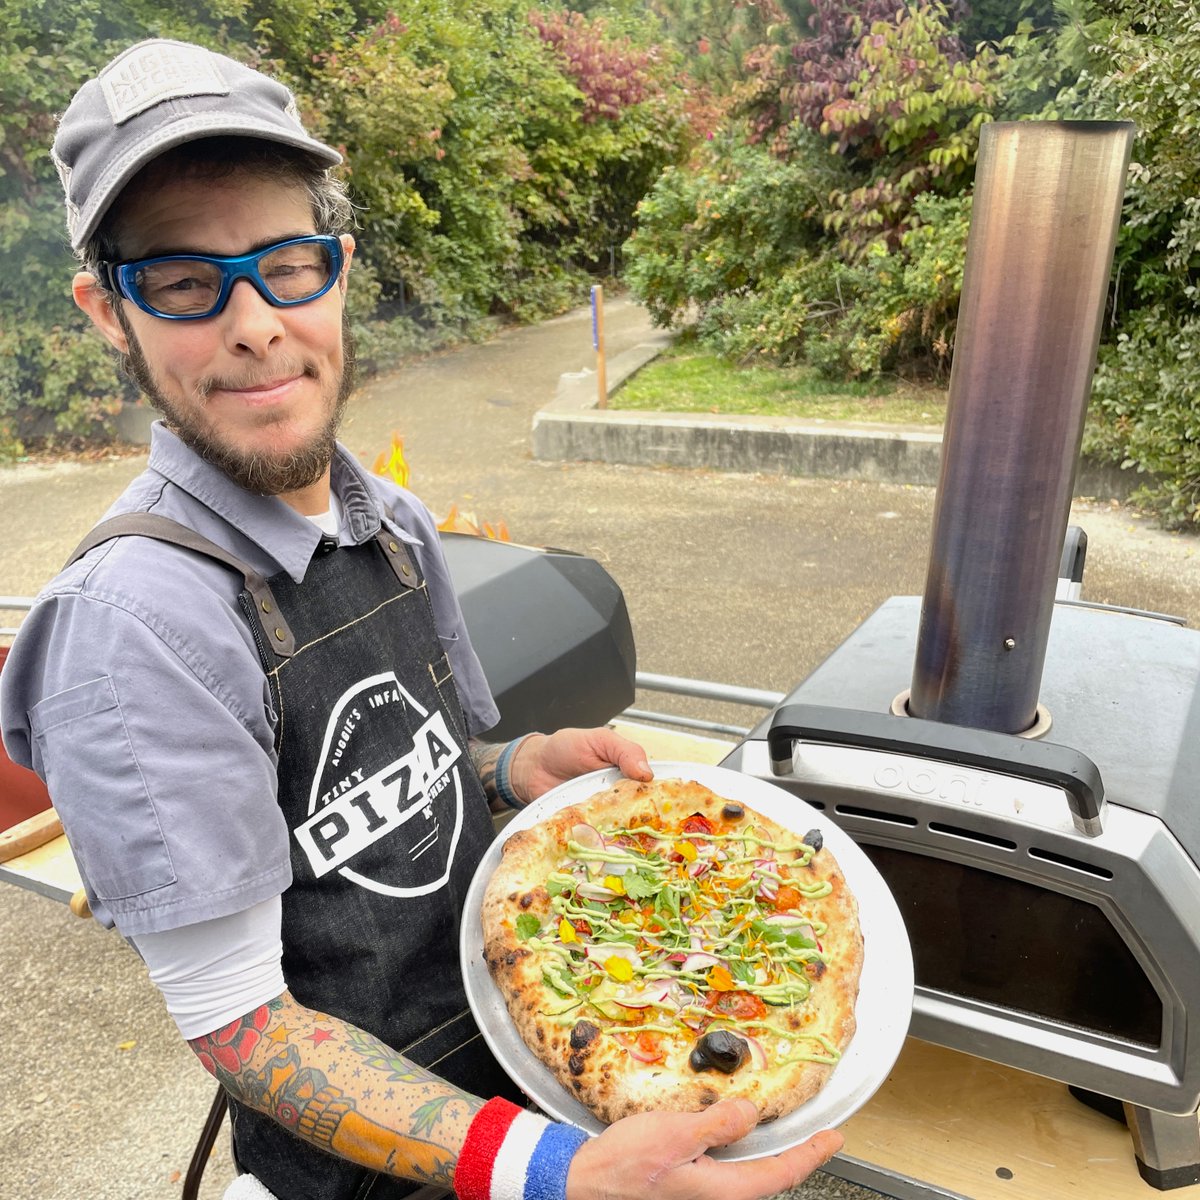 Happy #PRIDEMonth! Celebrate by joining the #SummerSliceAThon Pizza Queers Team led by Auggie of Tiny Pizza Kitchen😍🍕 As a team member, you'll harness the power of #PizzaLove to fight hunger with pizza parties and pop-ups! 

Register now: sliceouthunger.org/summer-sliceat…